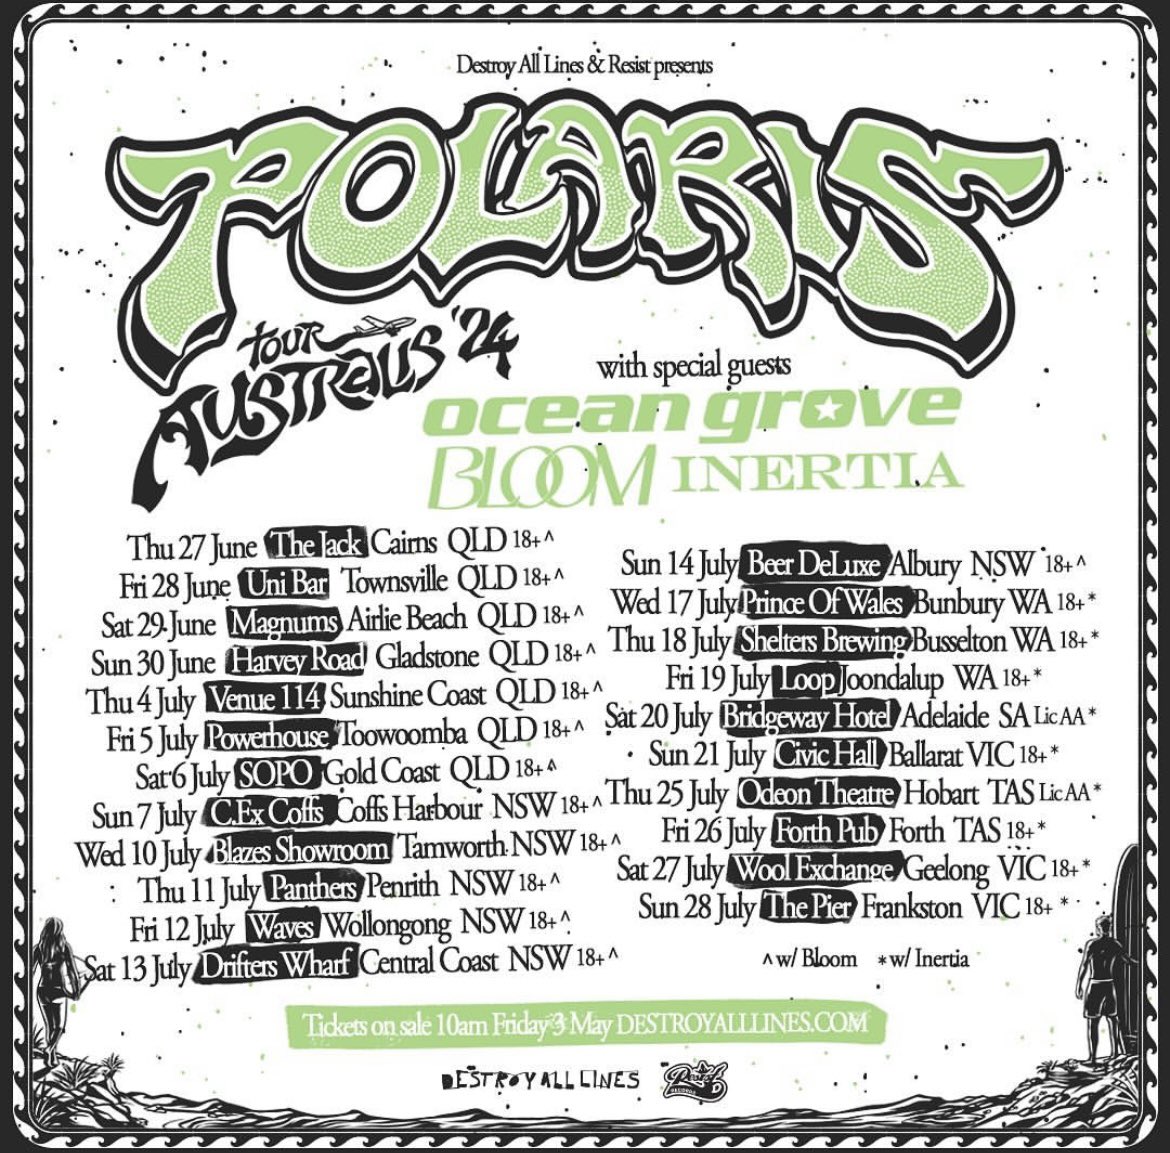 .@PolarisAus are doing a massive Australian regional tour along with @oceangrove , @Bloomsyd and @inertiasydney 👊
The Big 🐨 in Dadswells Bridge even makes the poster, props to @destroyalllines and these bands for bringing their shows to us 🙏
Details ⤵️
theundergroundaustralia.com.au/category/annou…